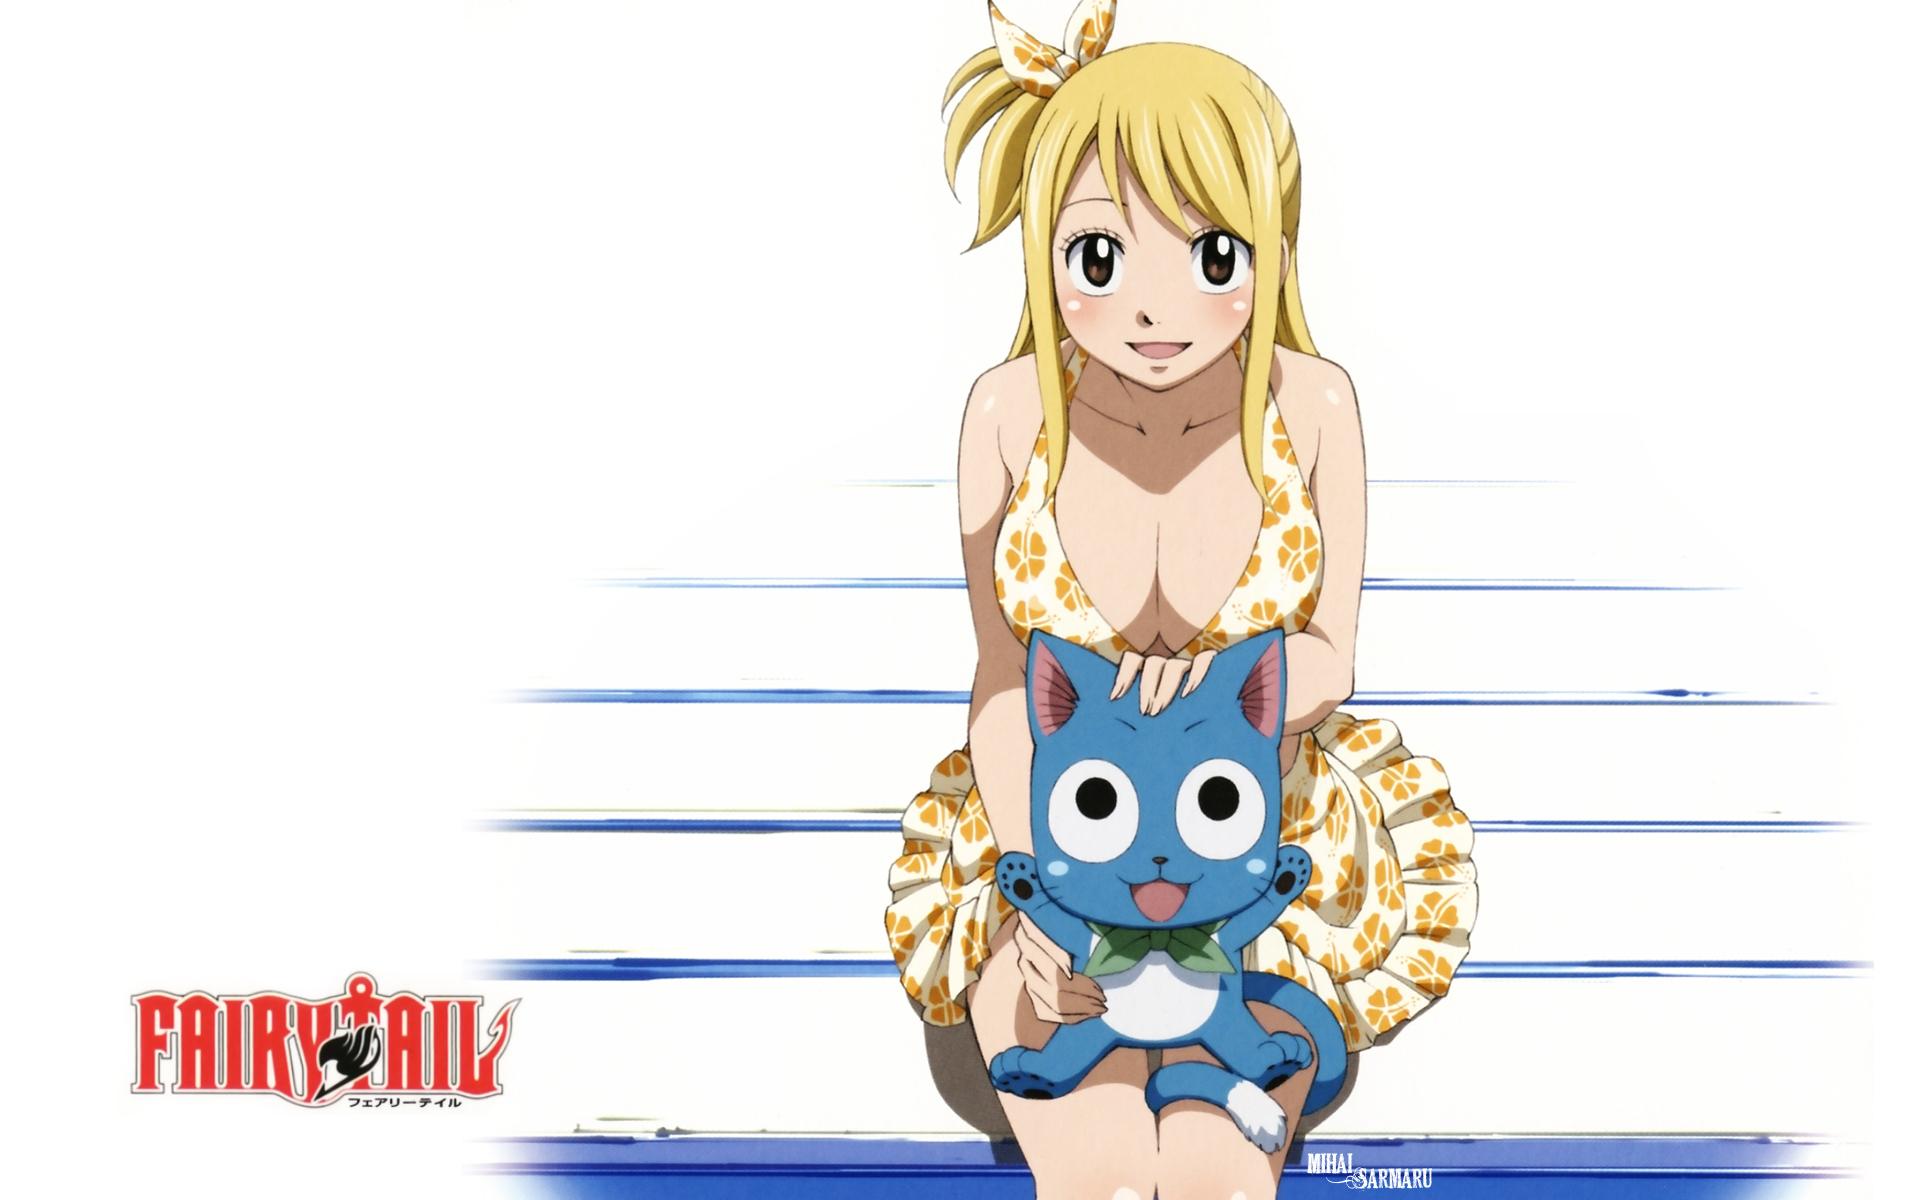 Fairy Tail Photo: Fairy Tail Wallpapers  Fairy tail photos, Fairy tail  anime, Fairy tail